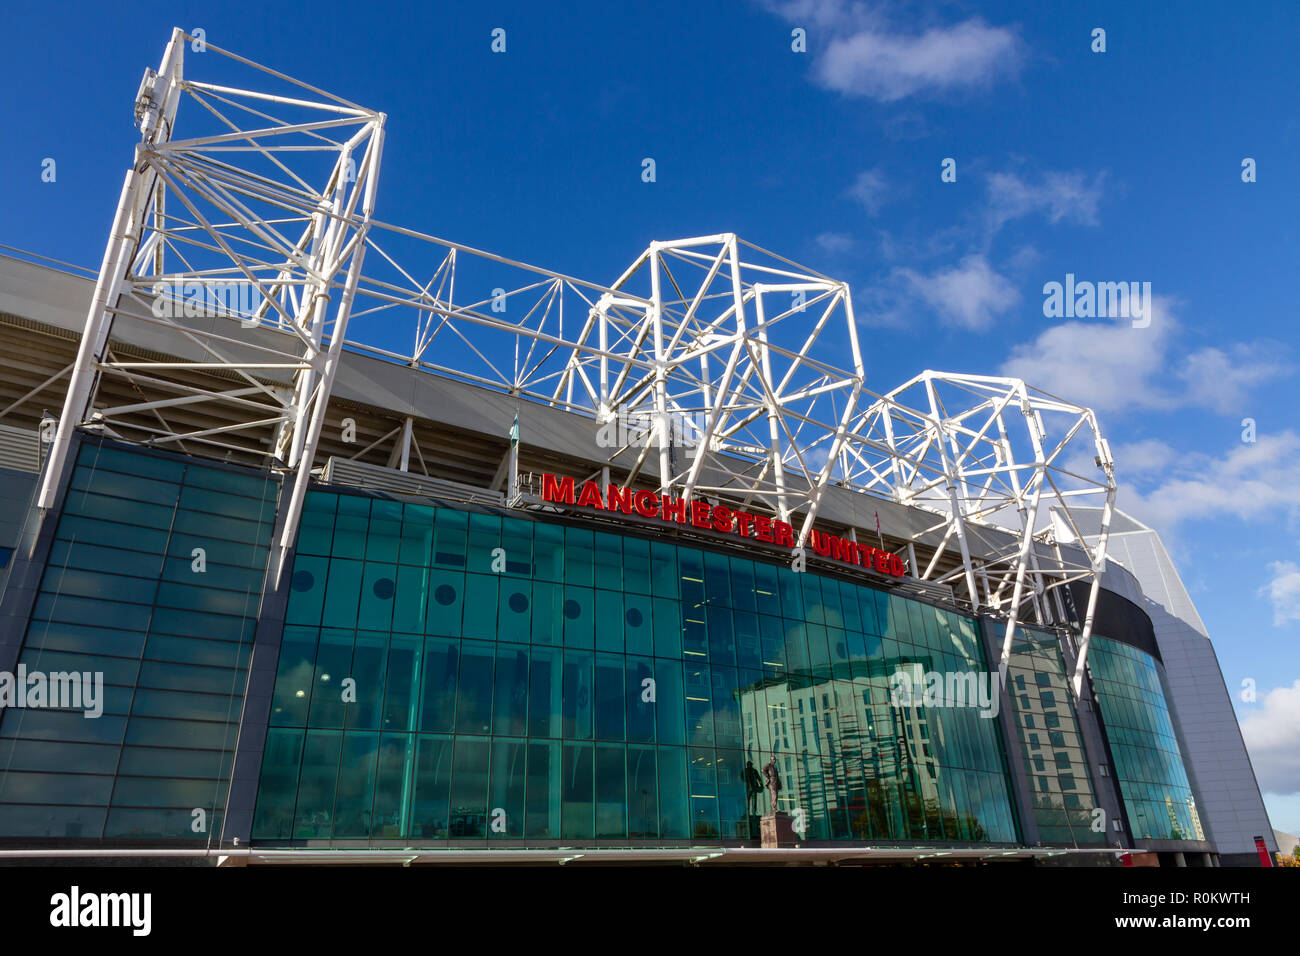 Old Trafford Football Ground. Home to Manchester United Football Club Stock Photo